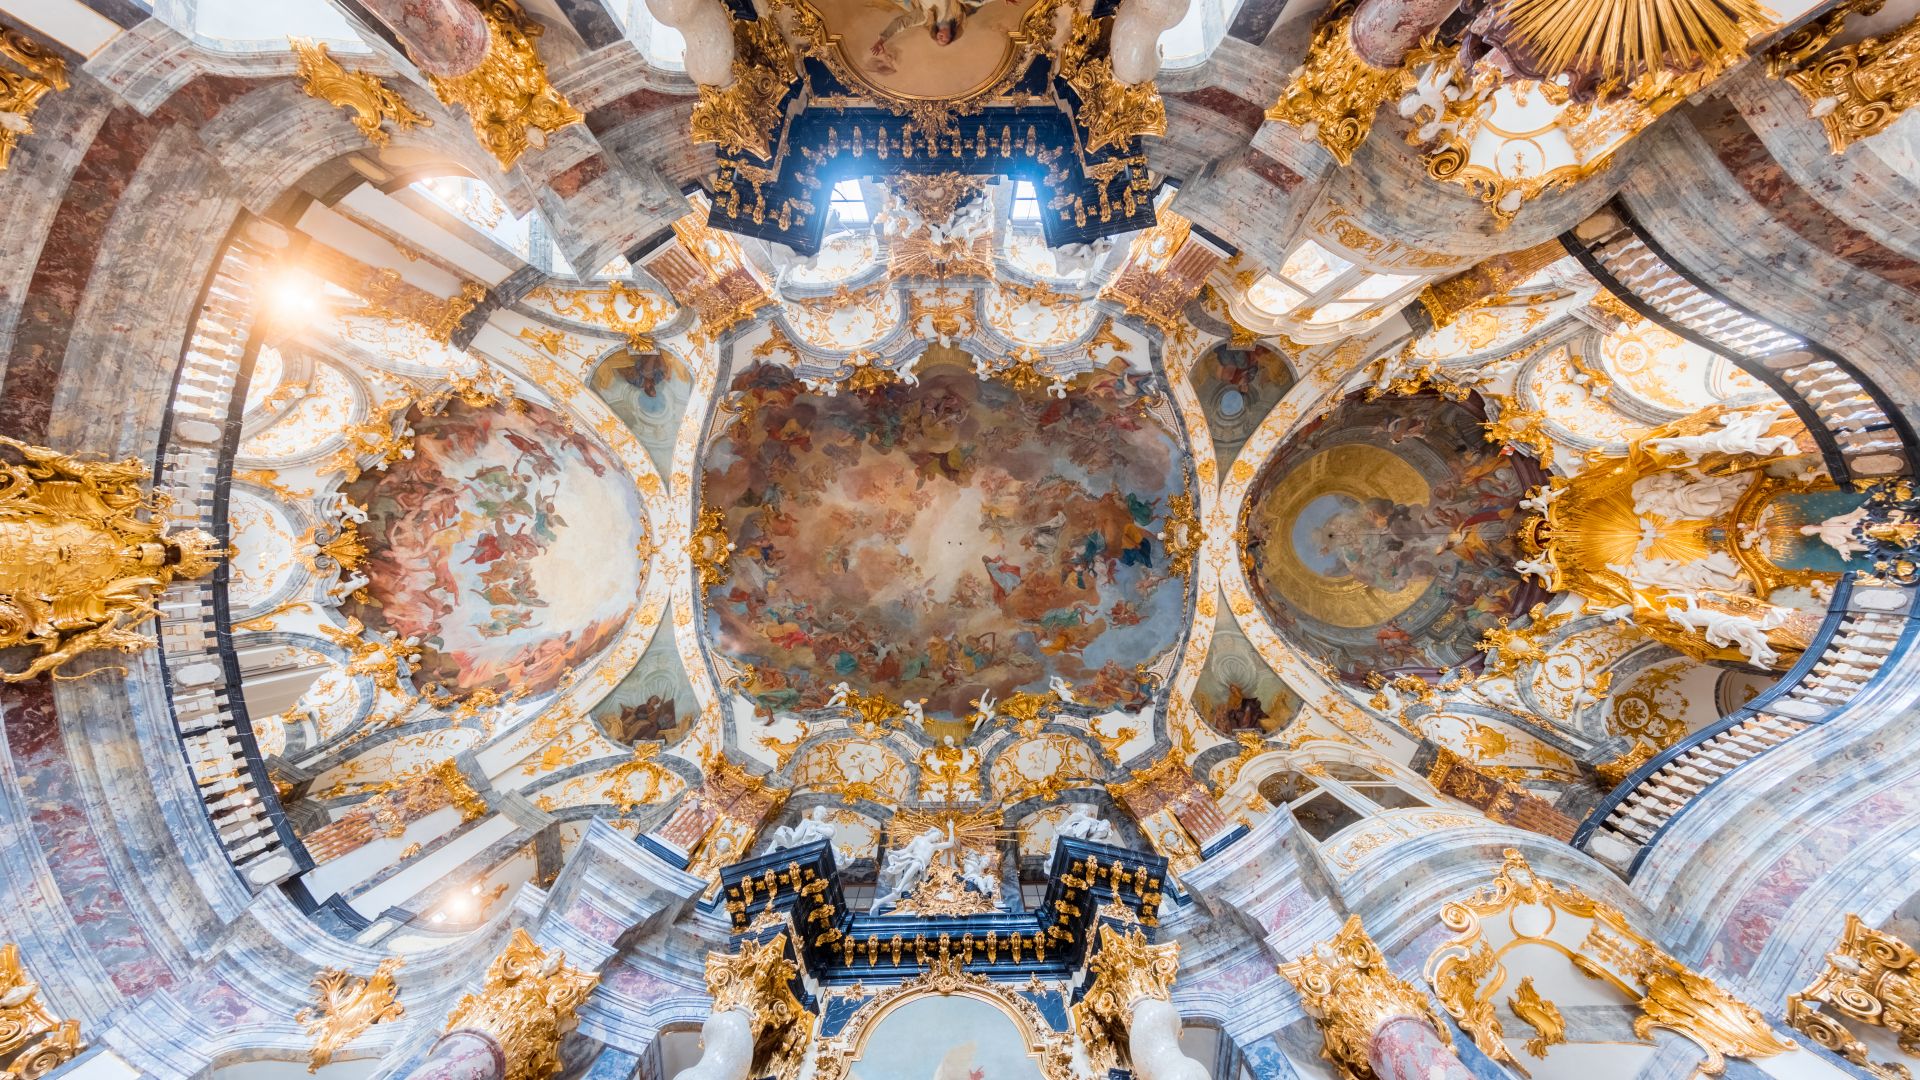 Würzburg: Würzburg Residence with its Baroque painted ceilings, UNESCO World Heritage Site